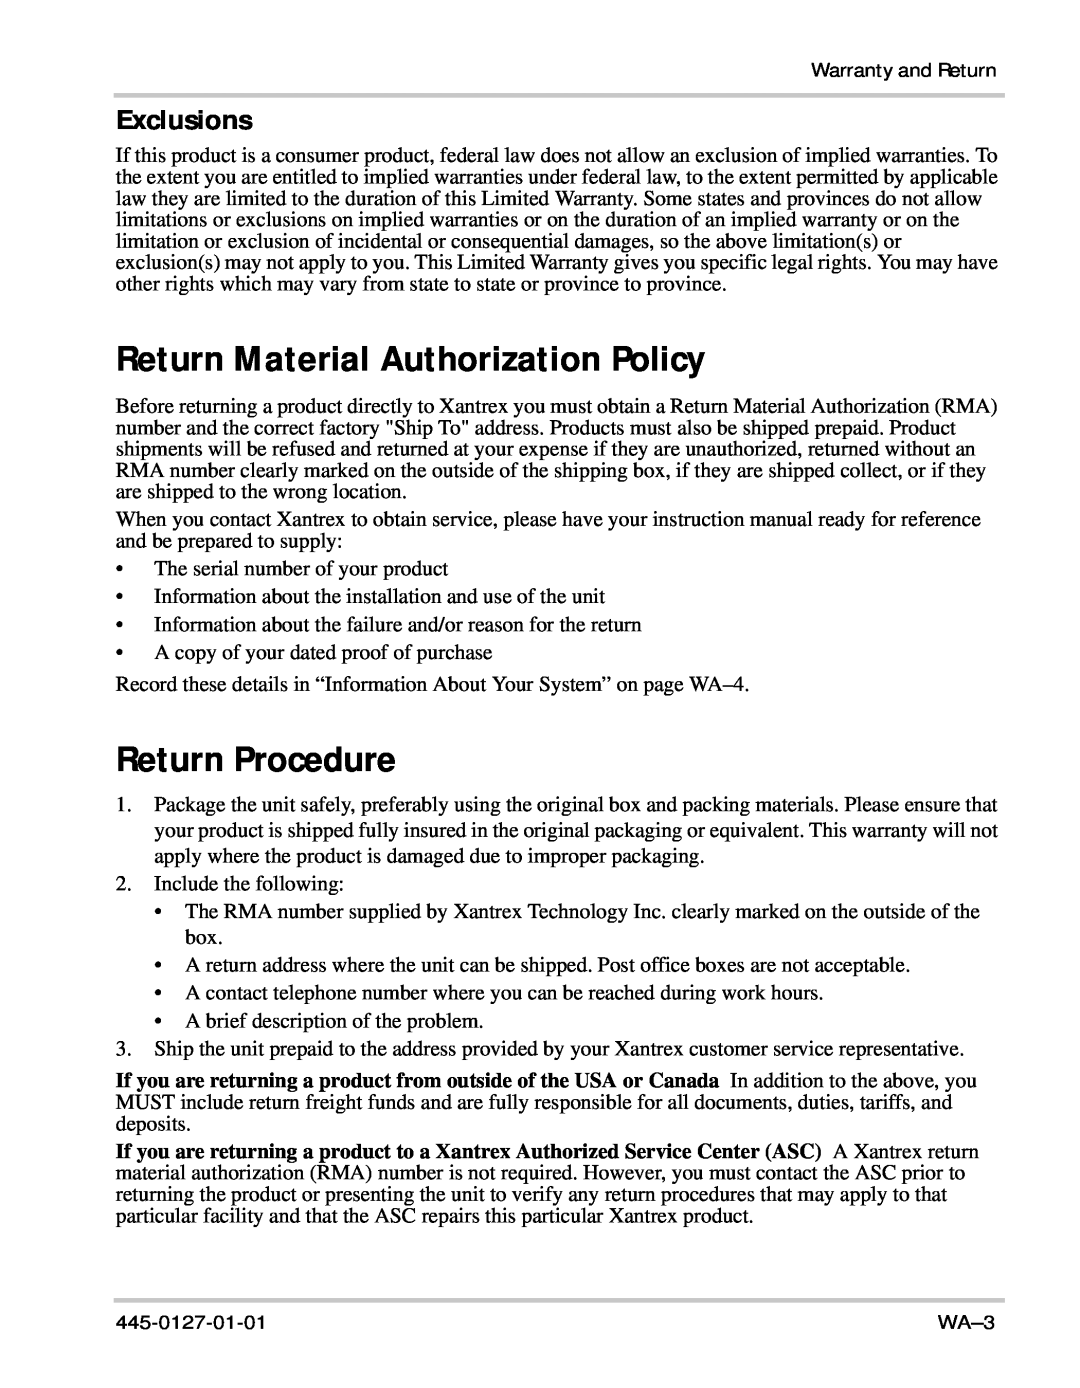 Xantrex Technology 1500 manual Return Material Authorization Policy, Return Procedure, Exclusions 